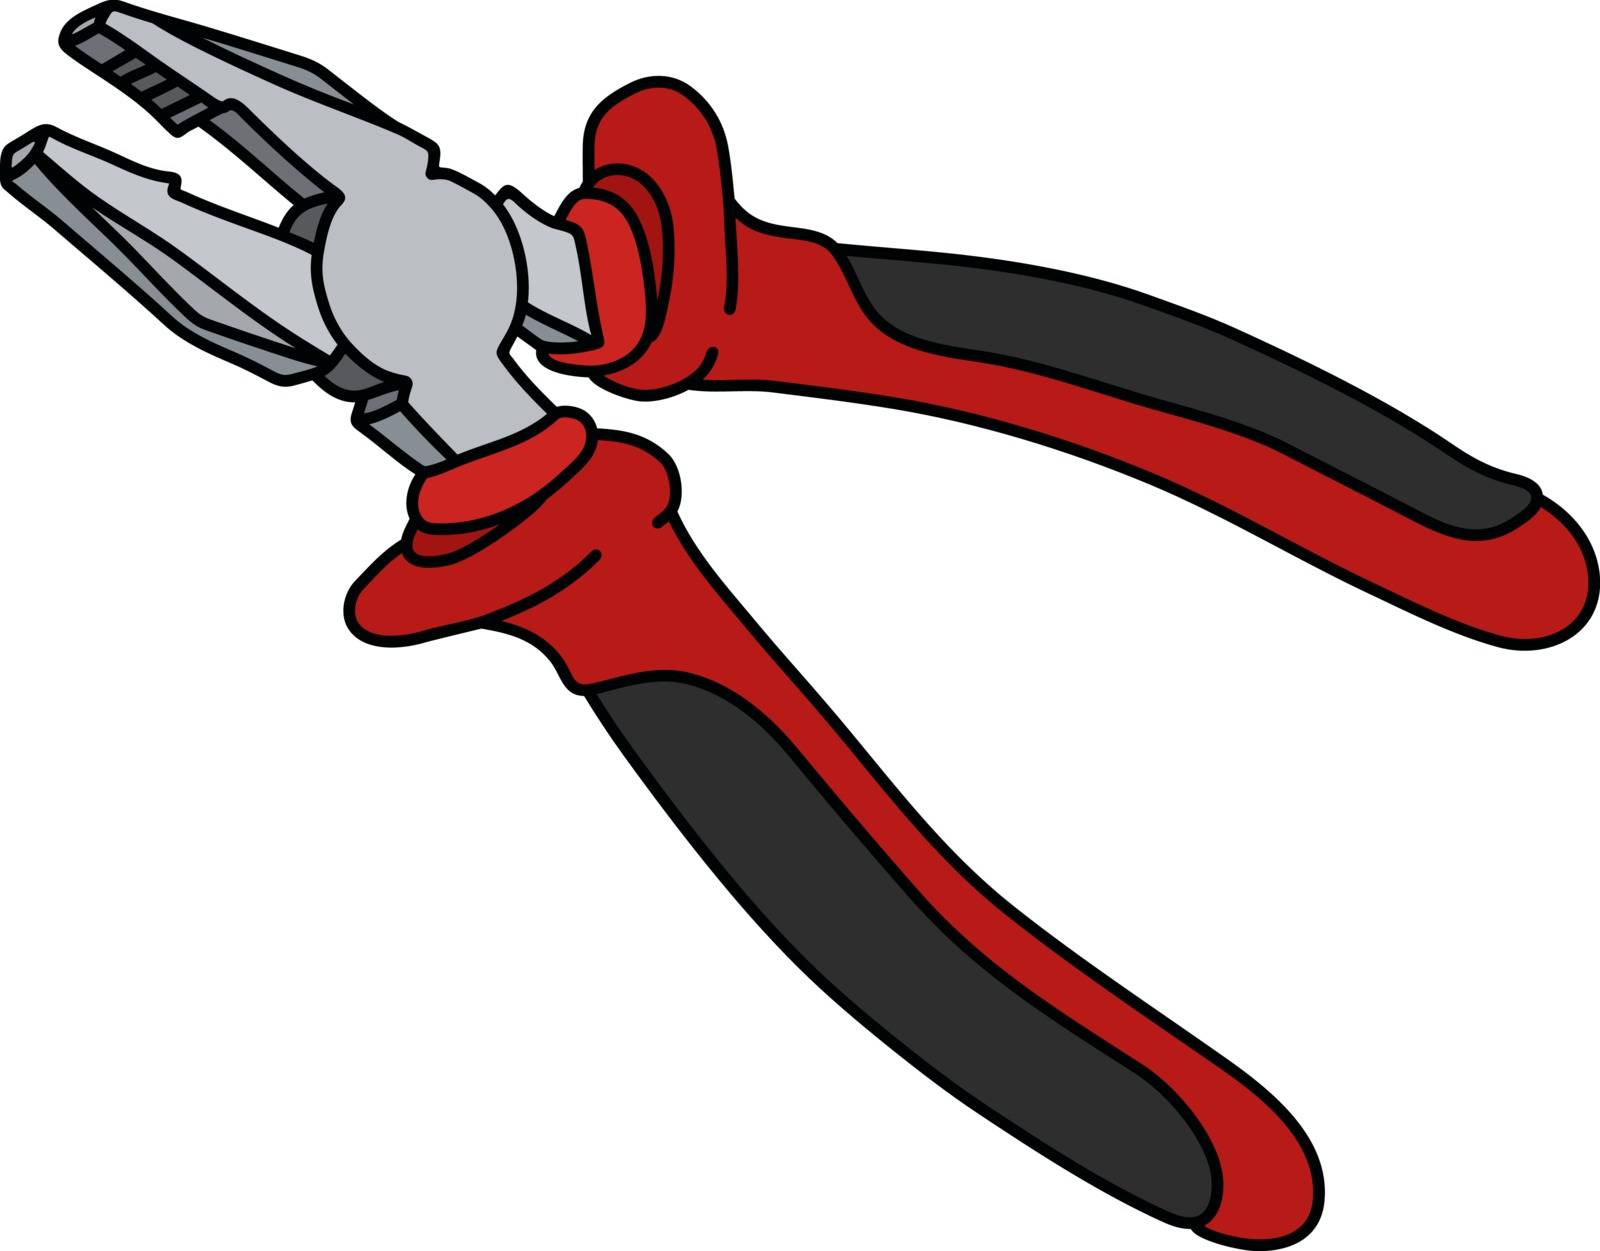 The hand drawing of a combination pliers with red plastic handle